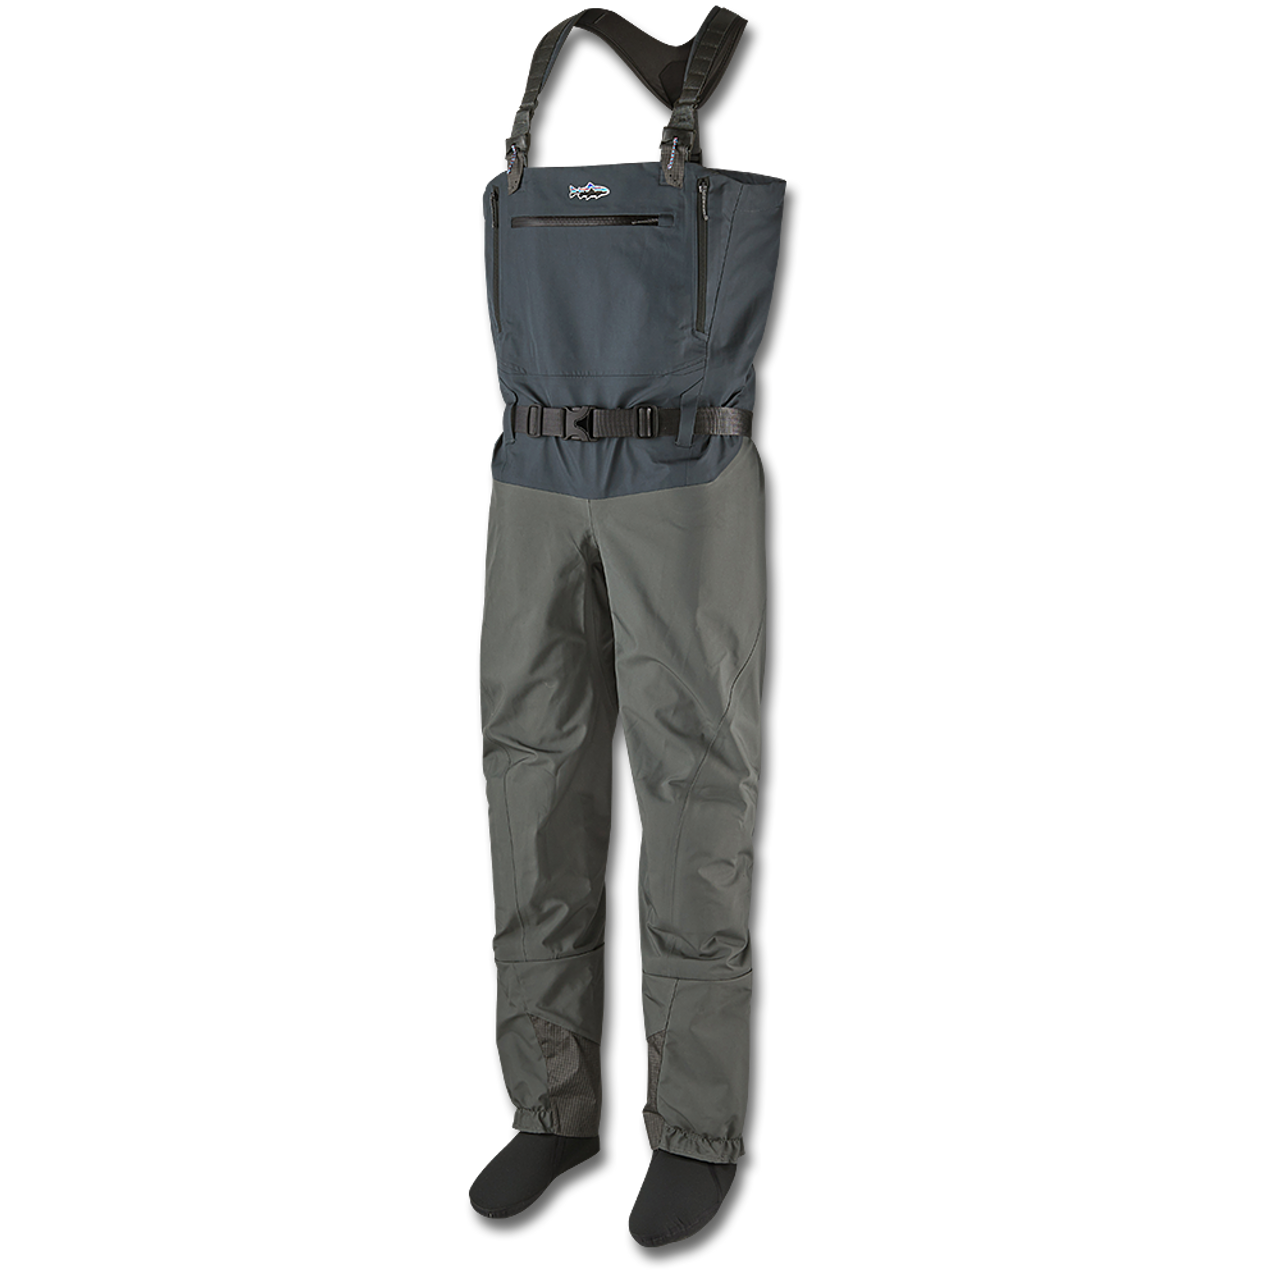 Patagonia’s Men’s Swiftcurrent Expedition Waders